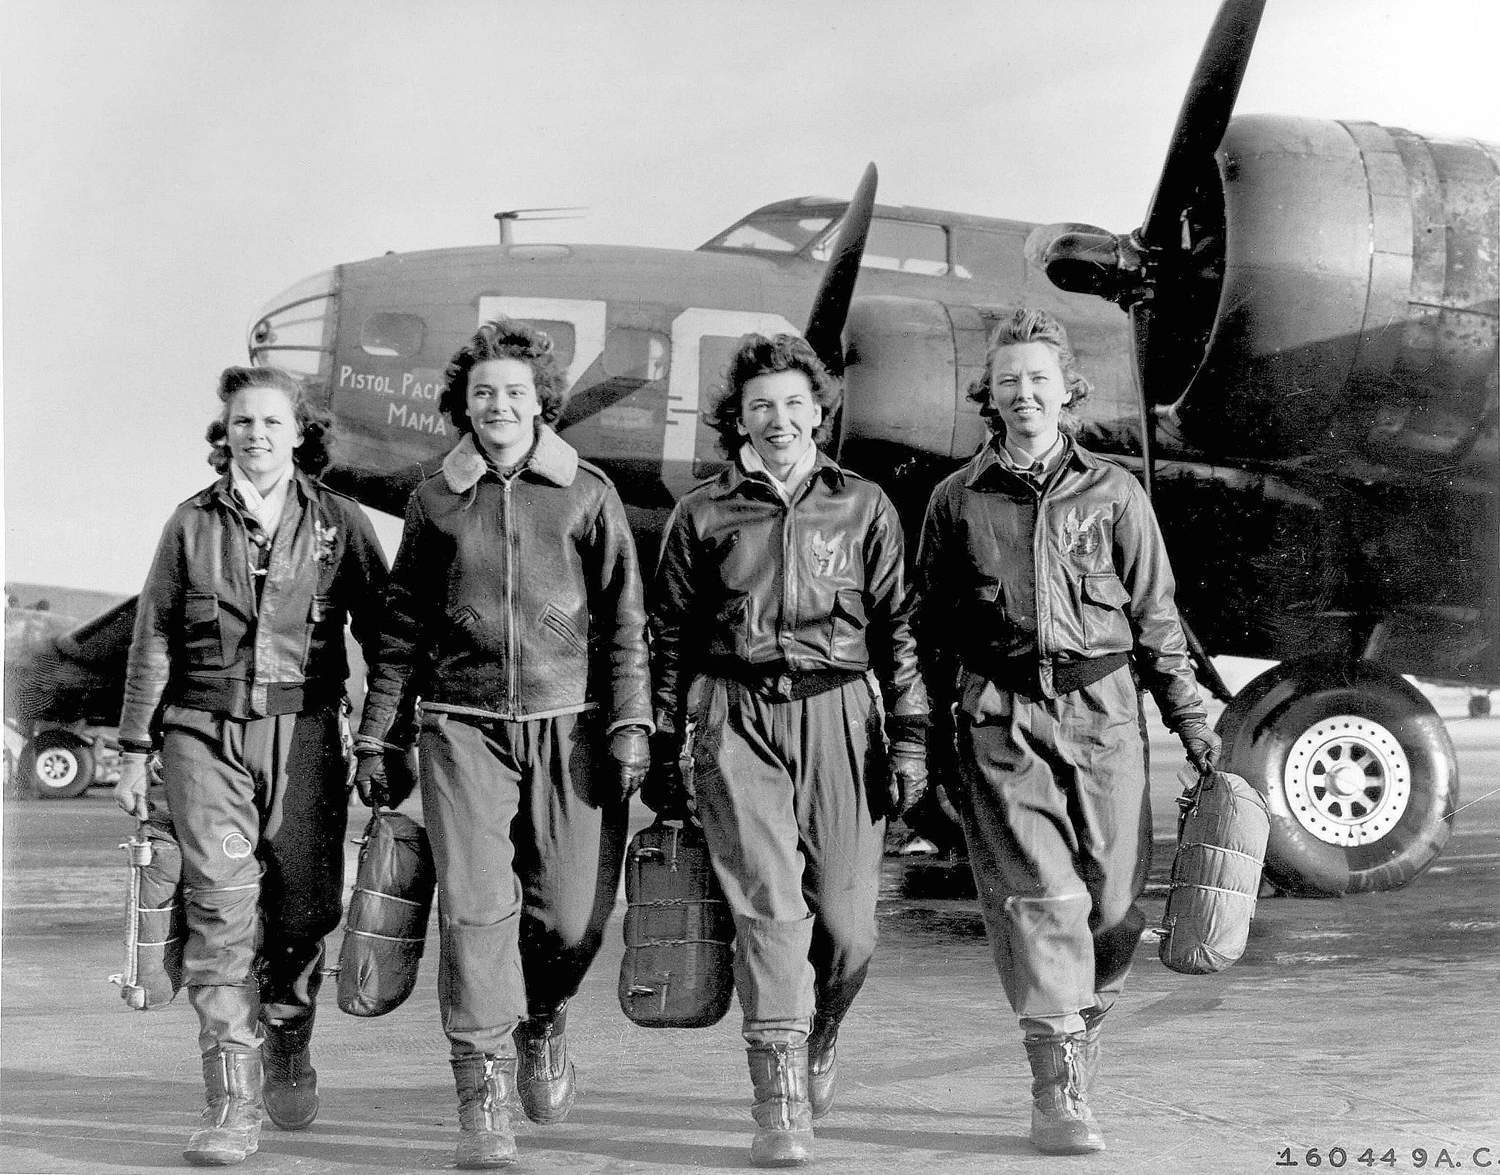 Four WASP pilots in flight gear and carrying parachutes with airplane in background